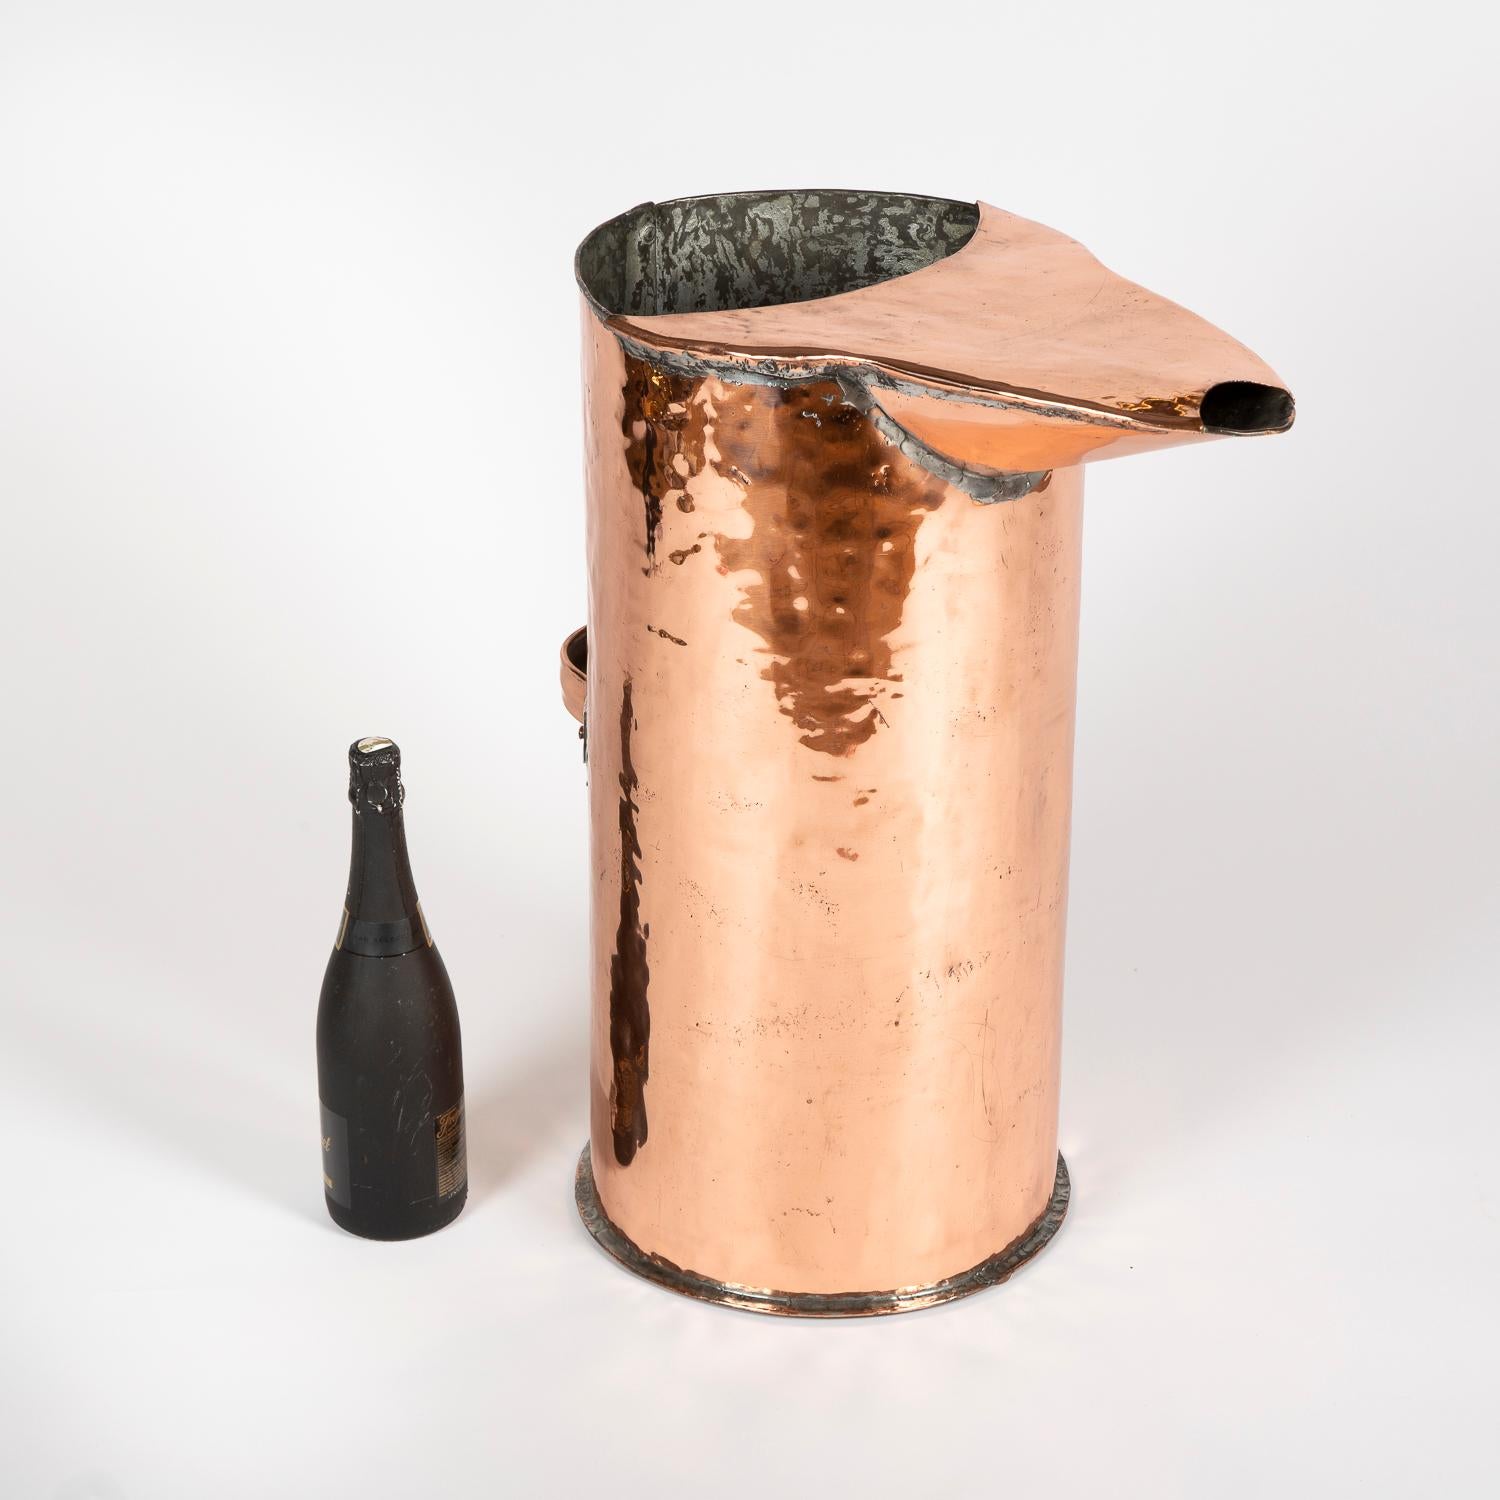 A large late 19th century copper distiller's jug from the Calvados in the Normandy region of northwest France.

Measure: Height 61 cm.